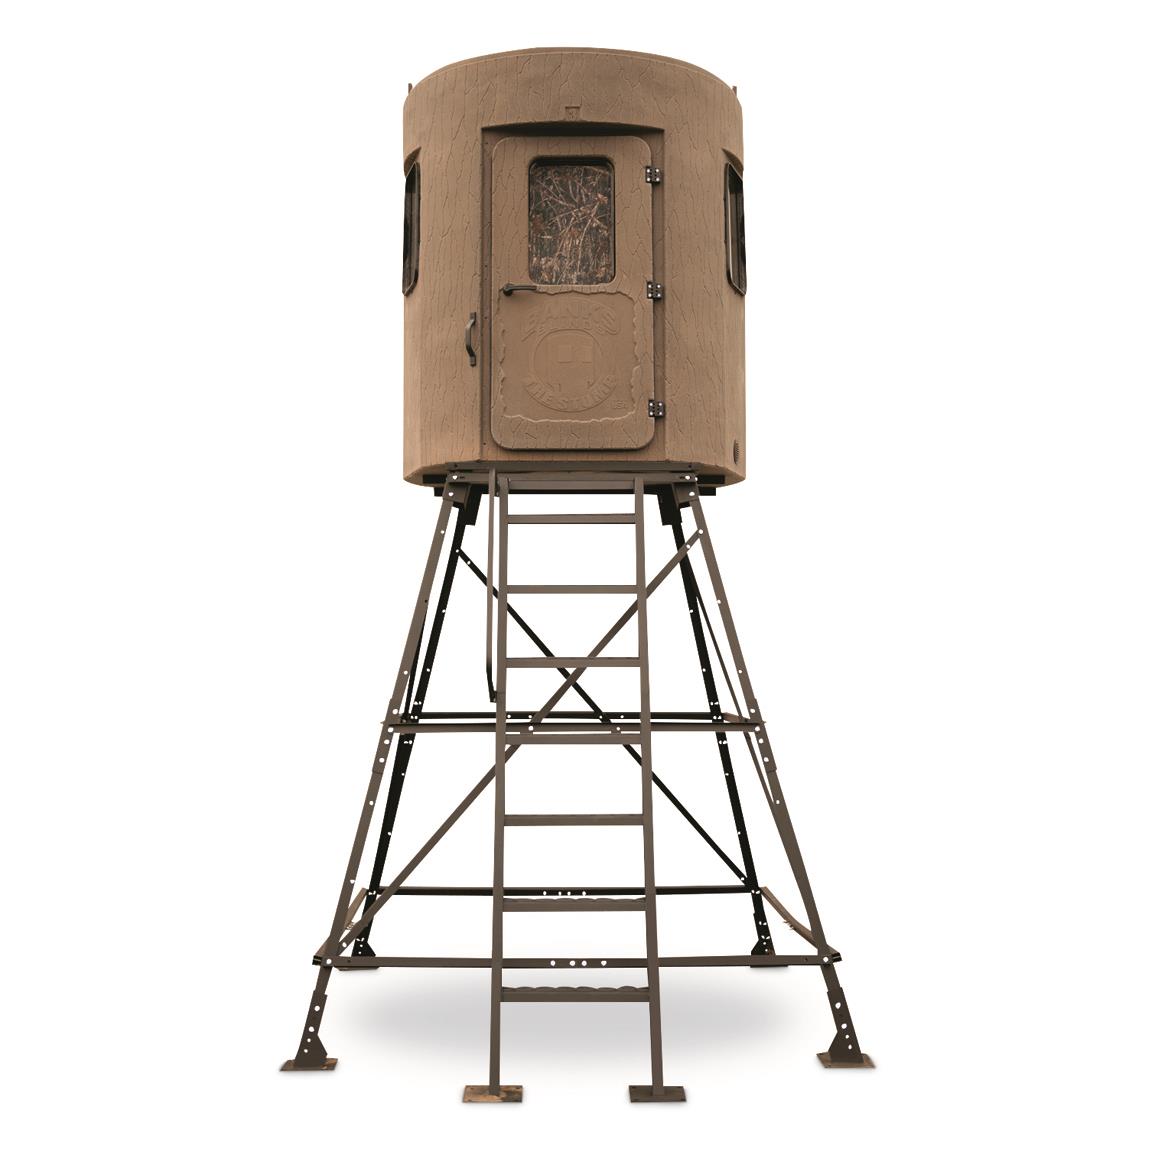 Banks Outdoors The Stump 3 Whitetail Properties Pro Hunter Hunting Blind